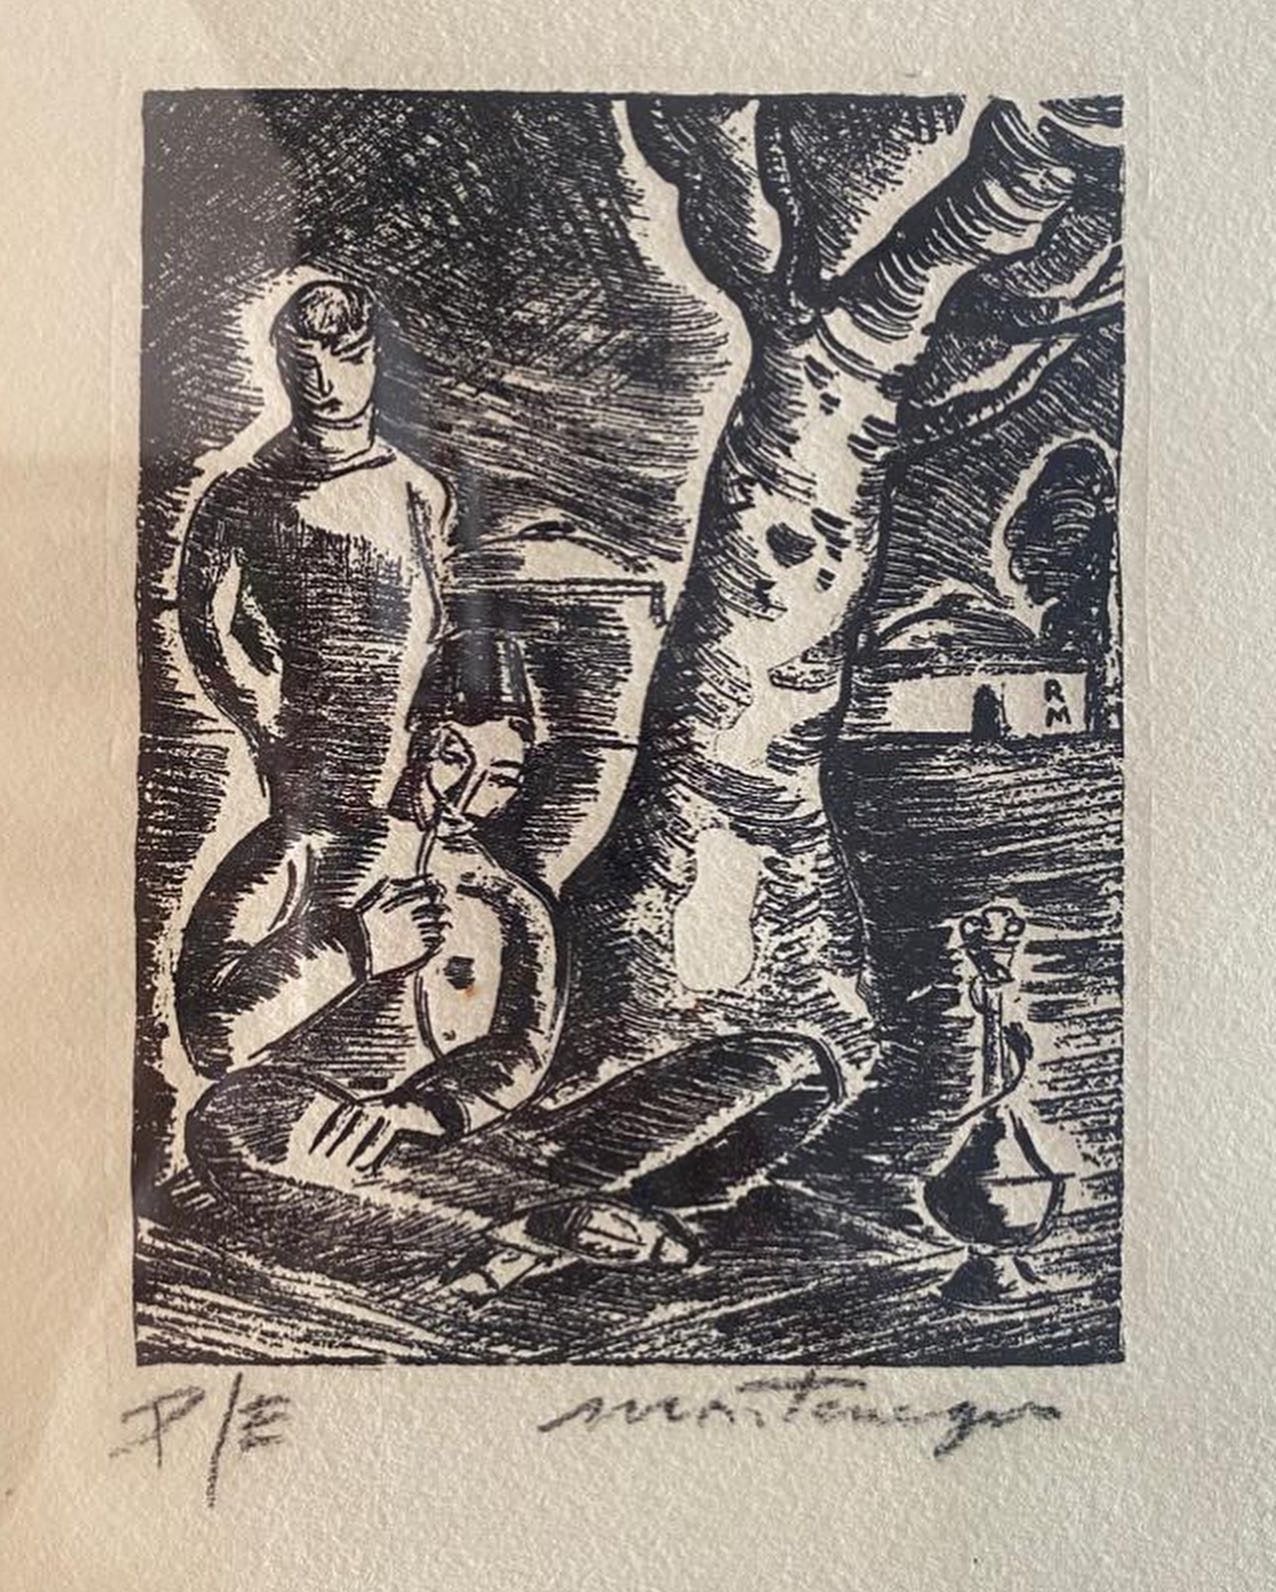 ROBERTO MONTENEGRO  (Guadalajara, Jal., Mex. 1887-1968) Engraving  Unknown title. Hand signed with charcoal. P/E (status test)